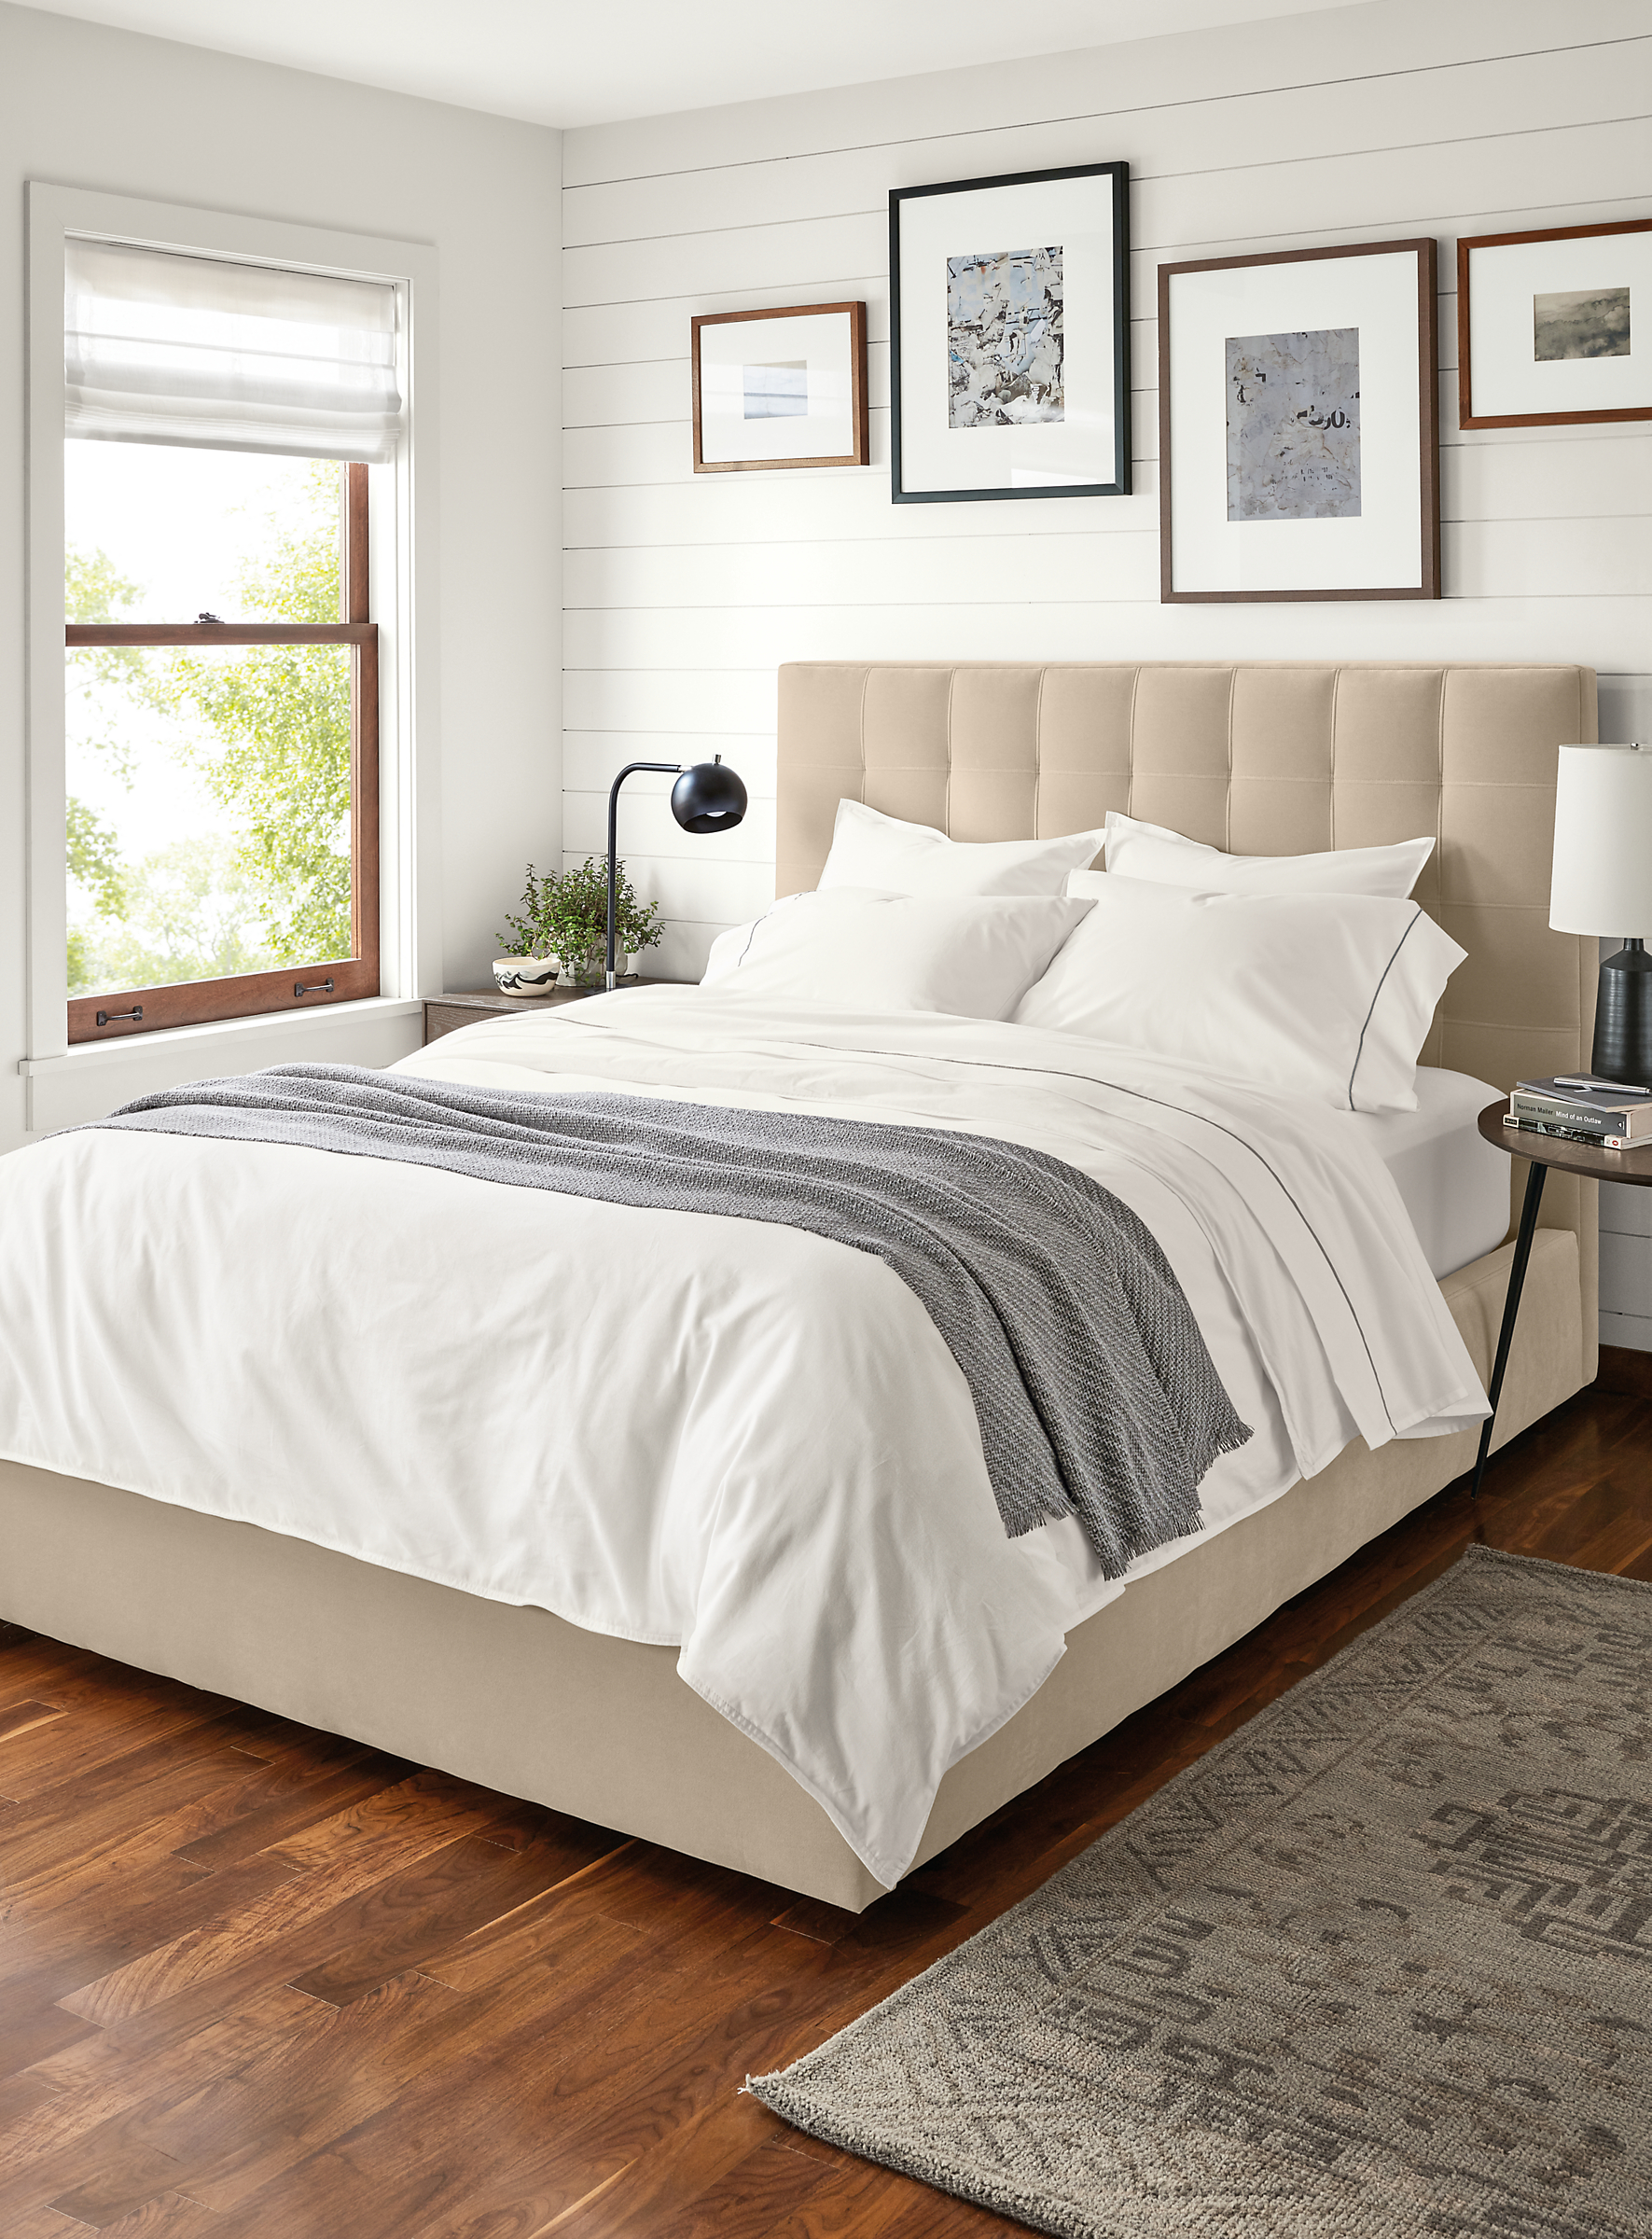 Detail of Sommerville Percale full/queen duvet cover in white on bed.